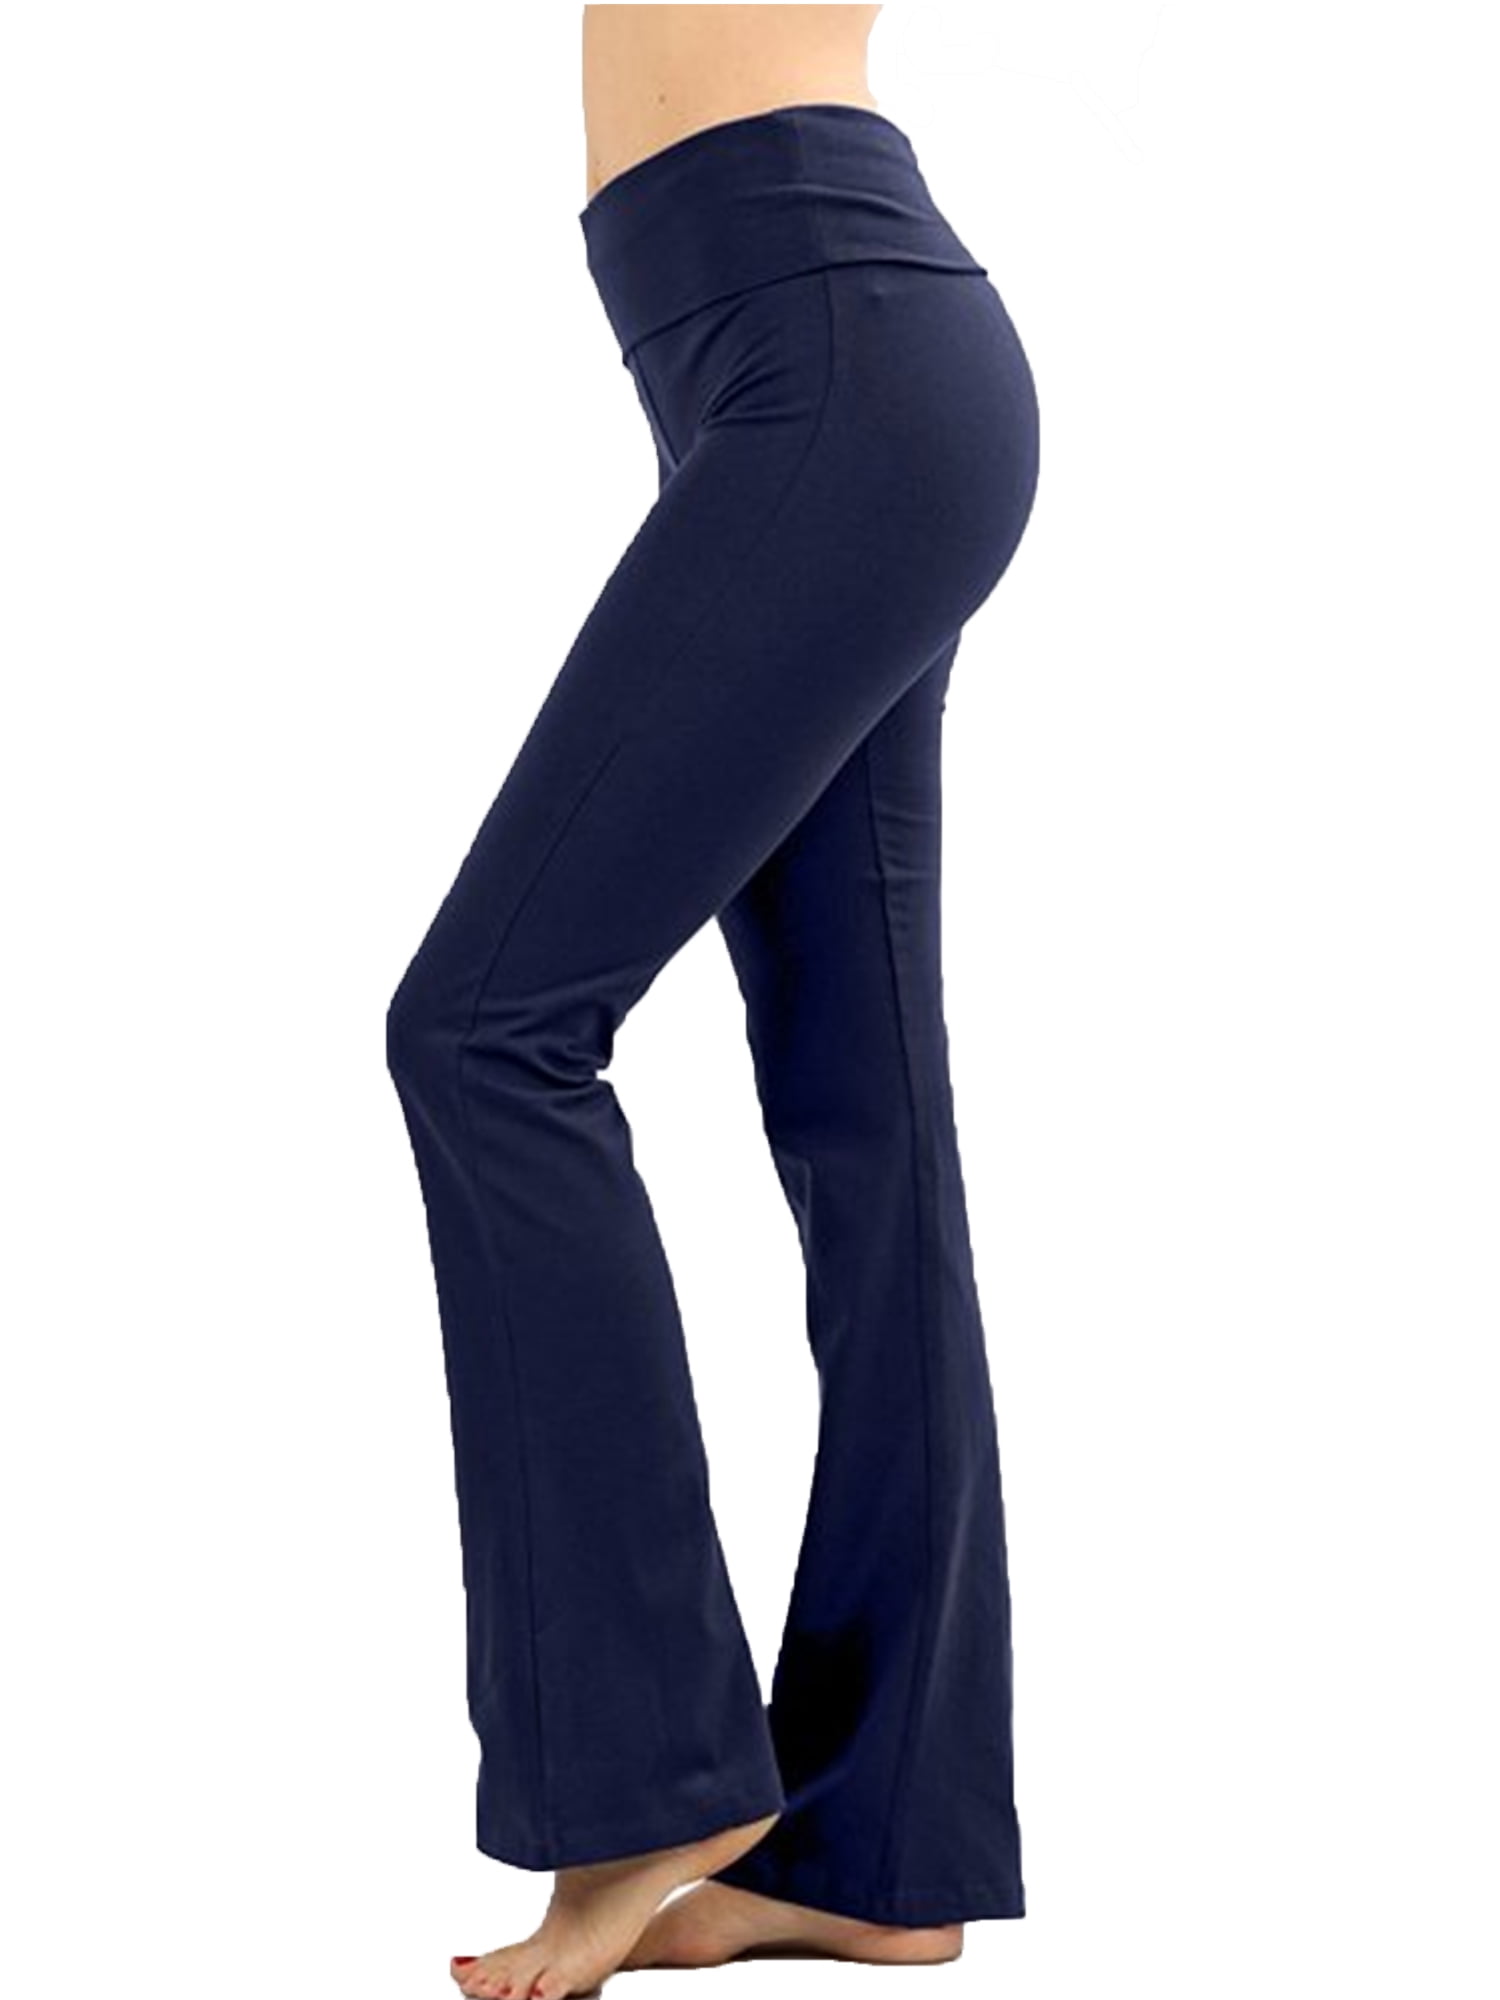 Women Bootcut Yoga Pants Bootleg Flare Trousers Workout Casual Fitness Running 